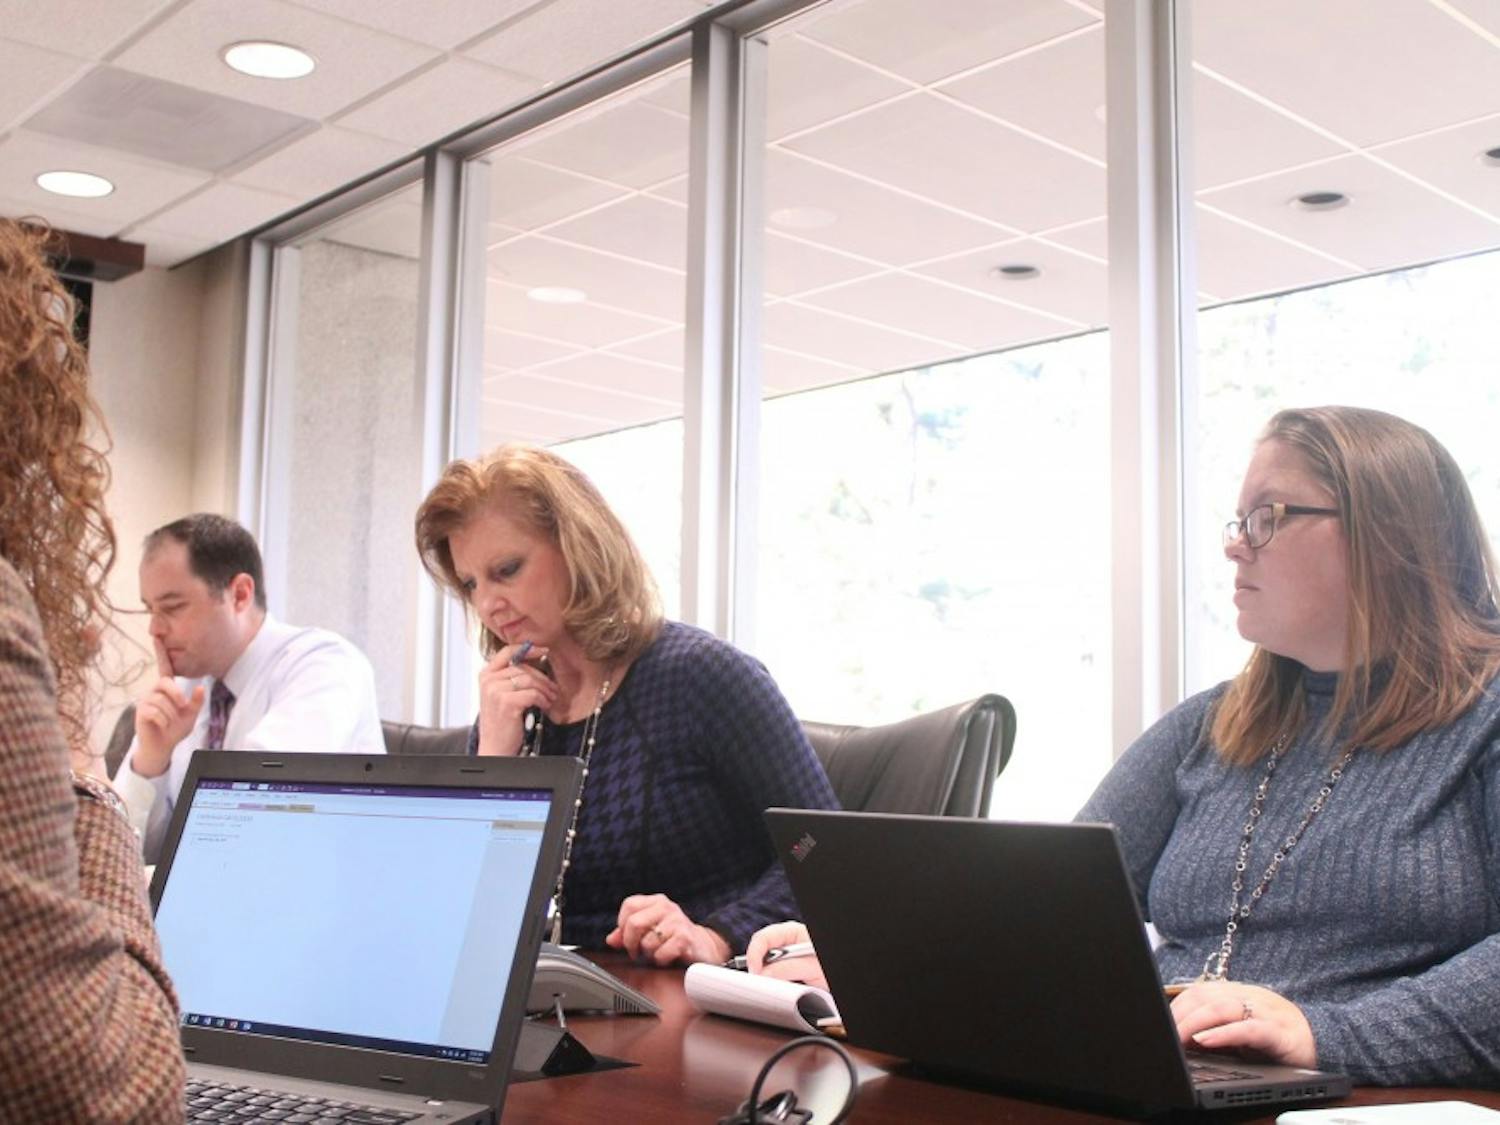 Ed Purchase (left), Lynne Sanders (center) and Heather Hummer (right) discuss logistics of their yearly conference at C.D. Spangler Building in Chapel Hill, NC on the morning of Thursday, Jan. 10, 2019.&nbsp;